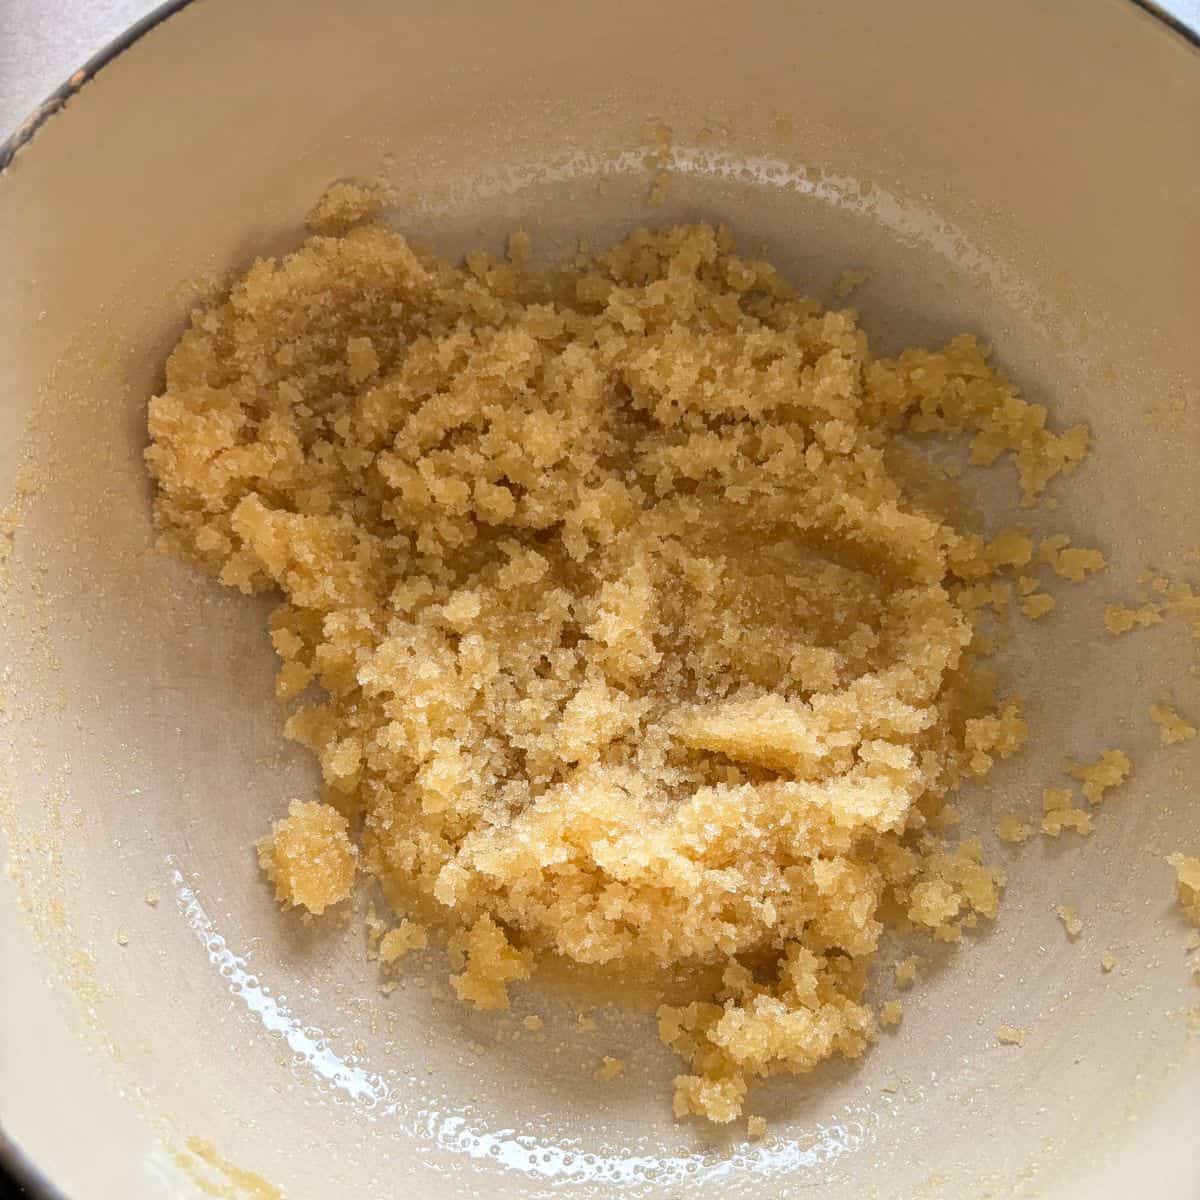 Sugar and salt mixed with ghee in pan.